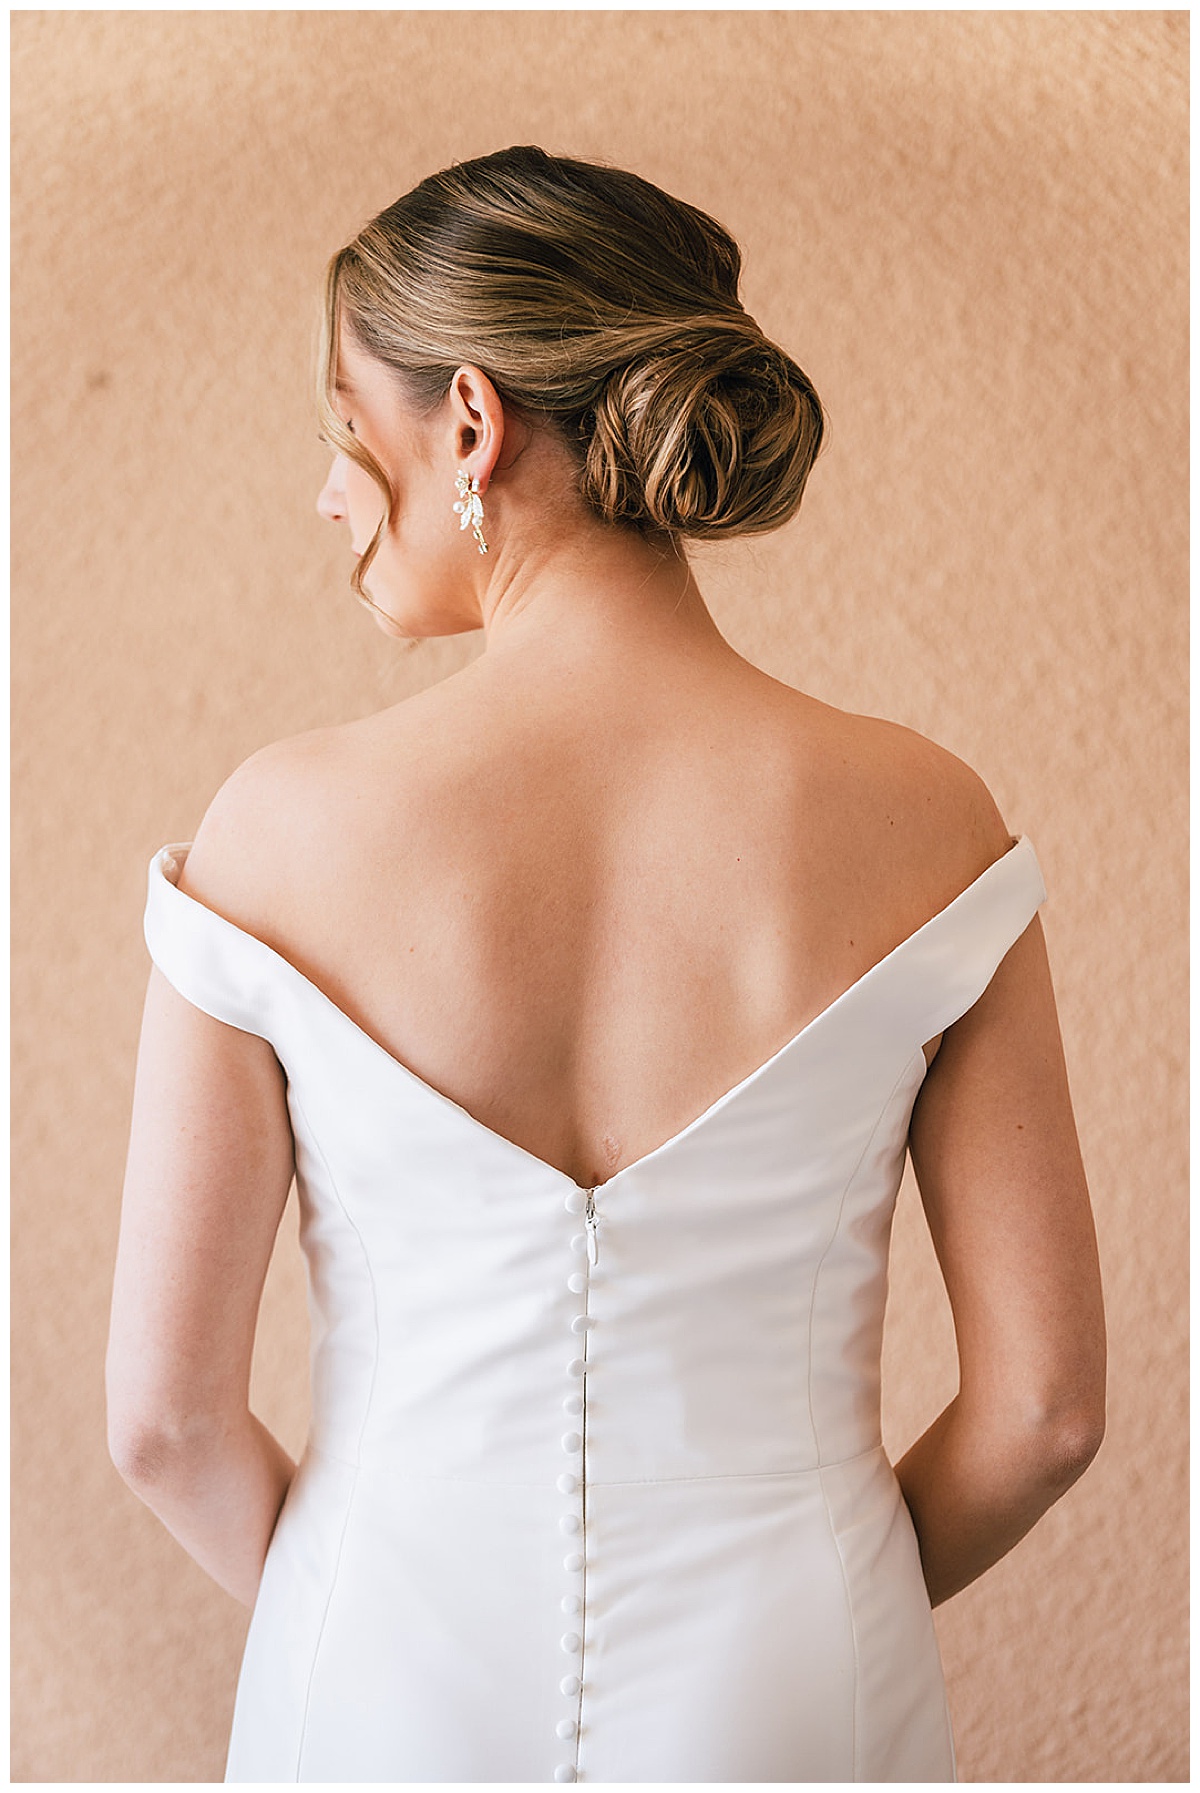 Bridal gown by Kayla Bouren Photography